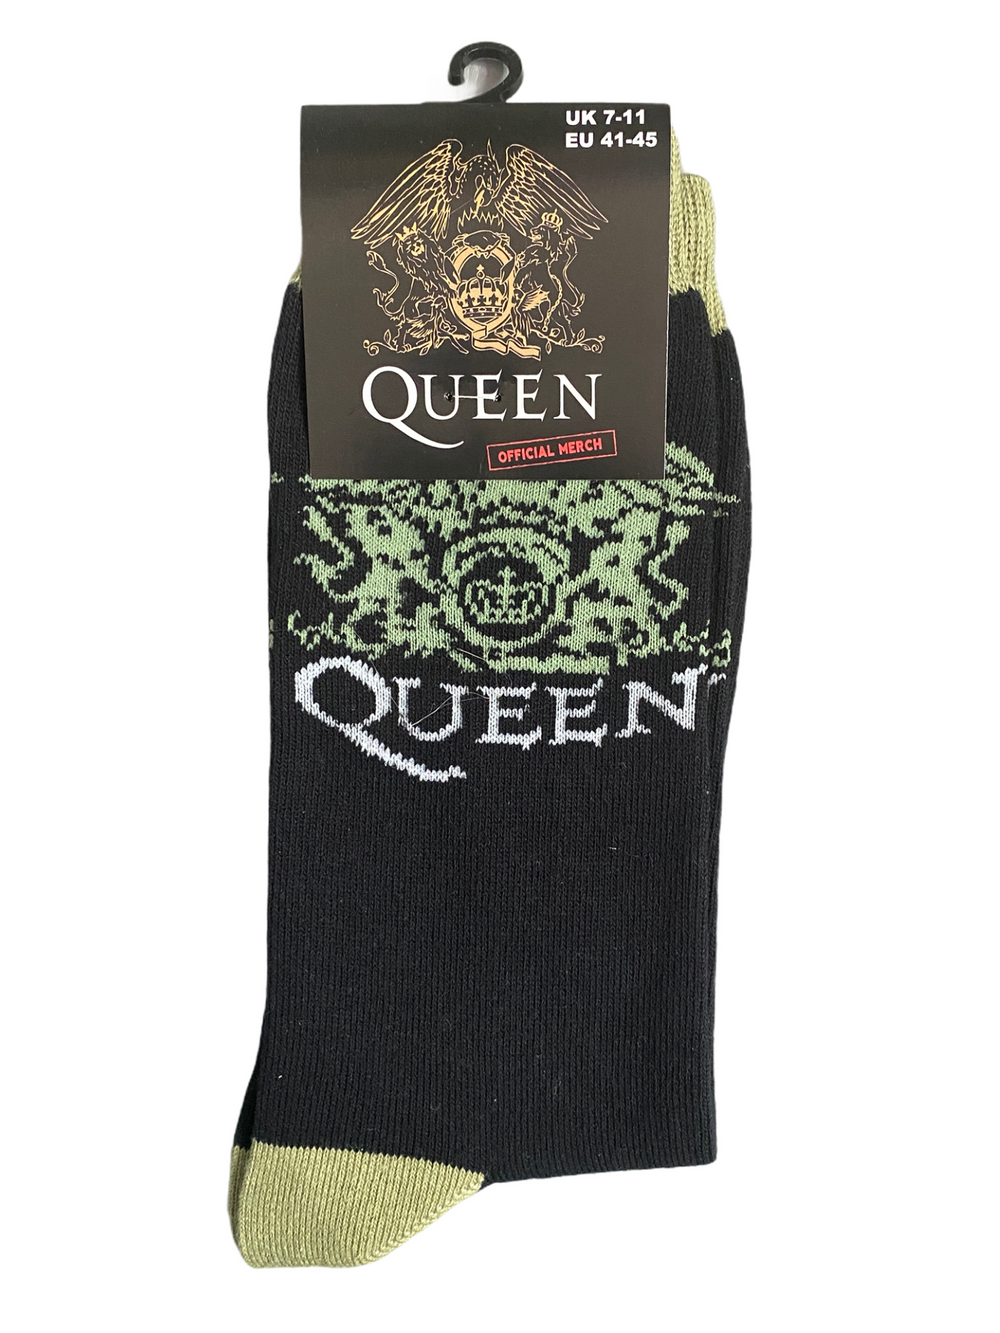 Queen Crest Logo Official Product 1 Pair Jacquard Socks Size 7-11 UK NEW